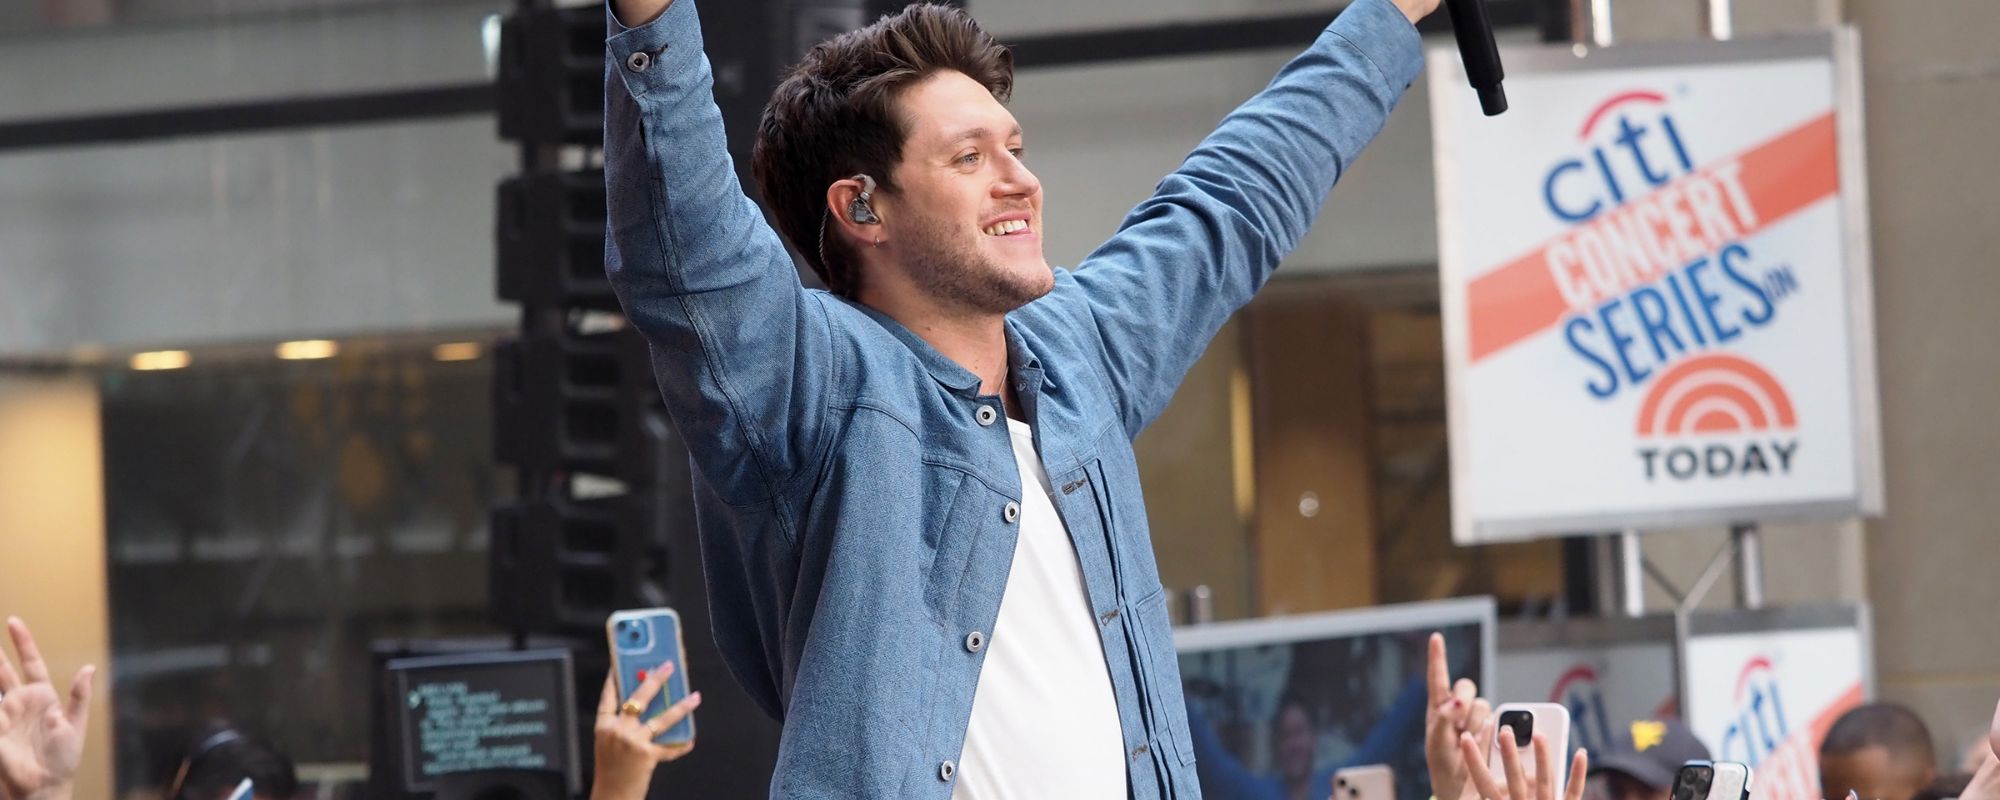 Niall Horan Deep Dives into the Creative Process of His New Album ‘The Show’—“It Was an Amazing Process”